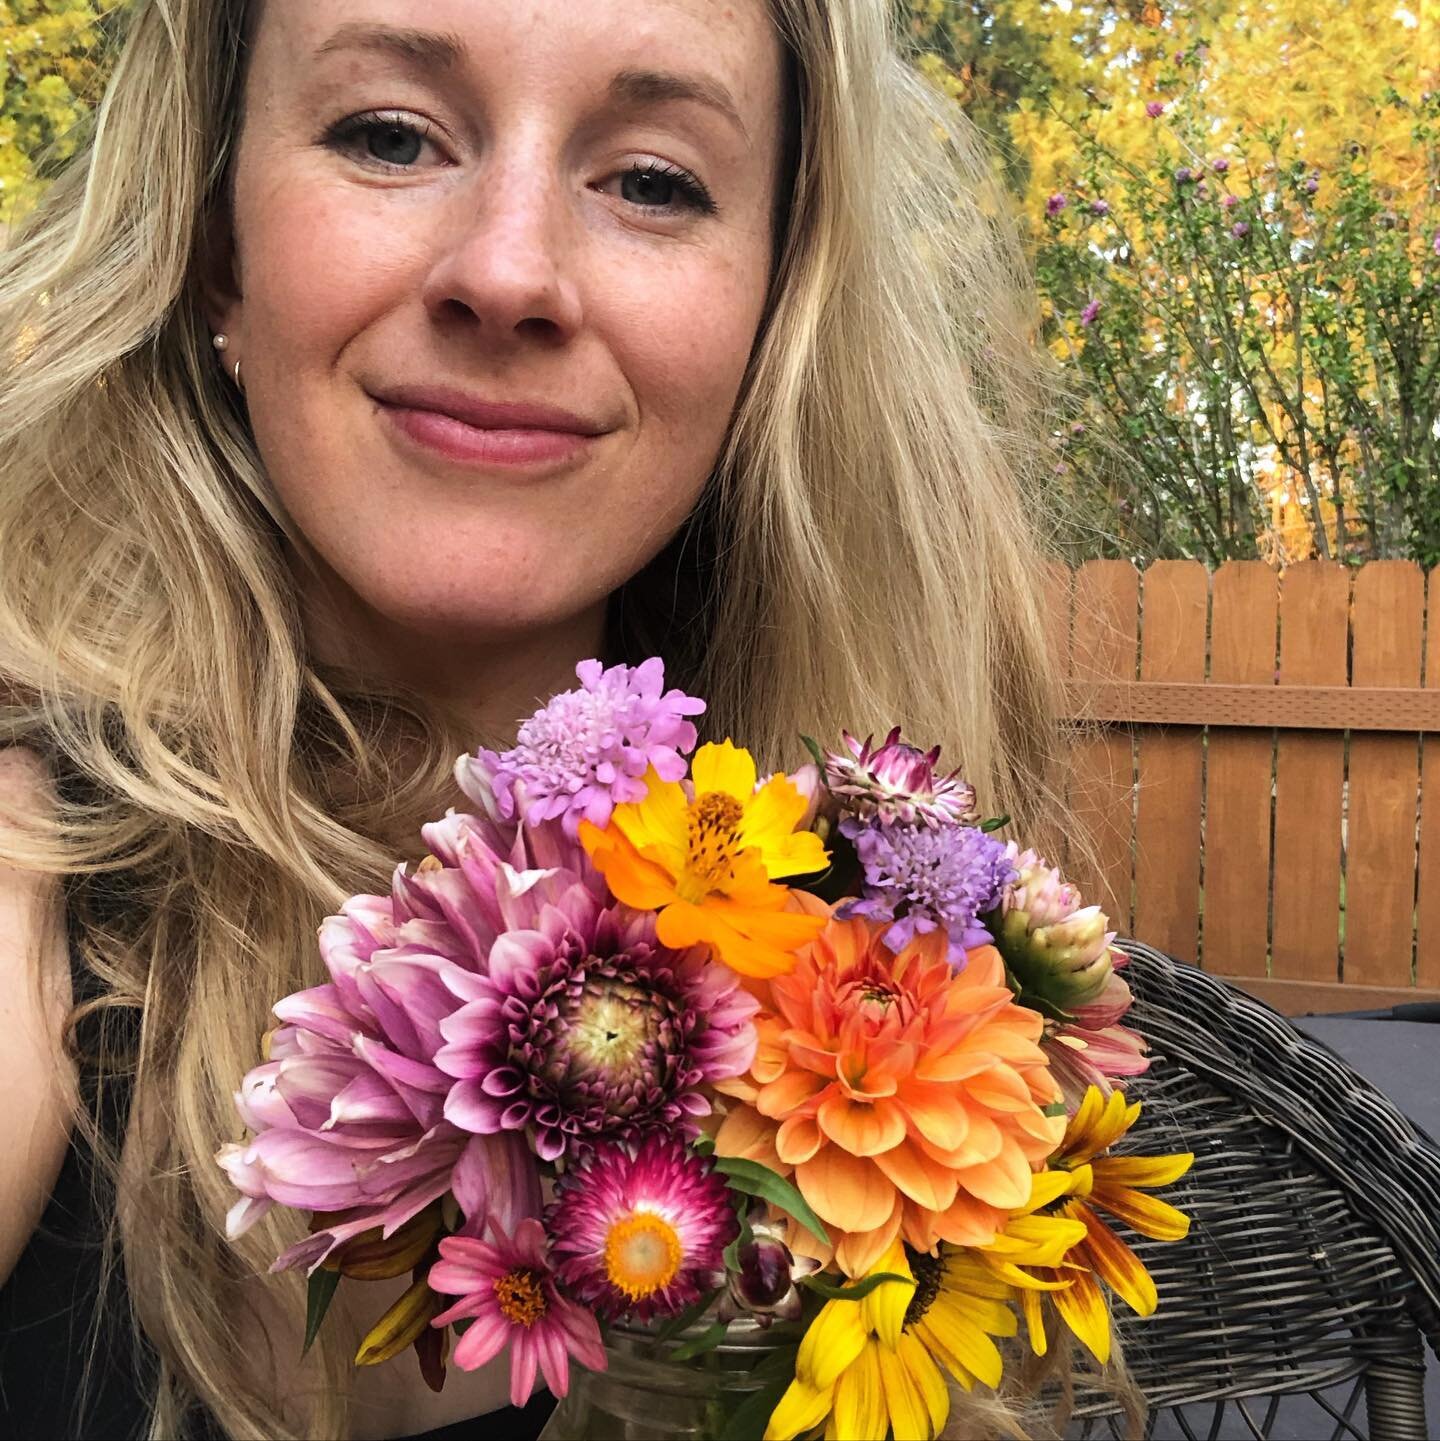 Proud flower mom moment!
I remember a cold, March day wandering the seed aisles at @northwestseedandpet and dreaming of this homegrown bouquet! 

#harmony #wellness #smile #flowers #bloom #rest #holistichealth #holistichealing #holisticdentistry #spo